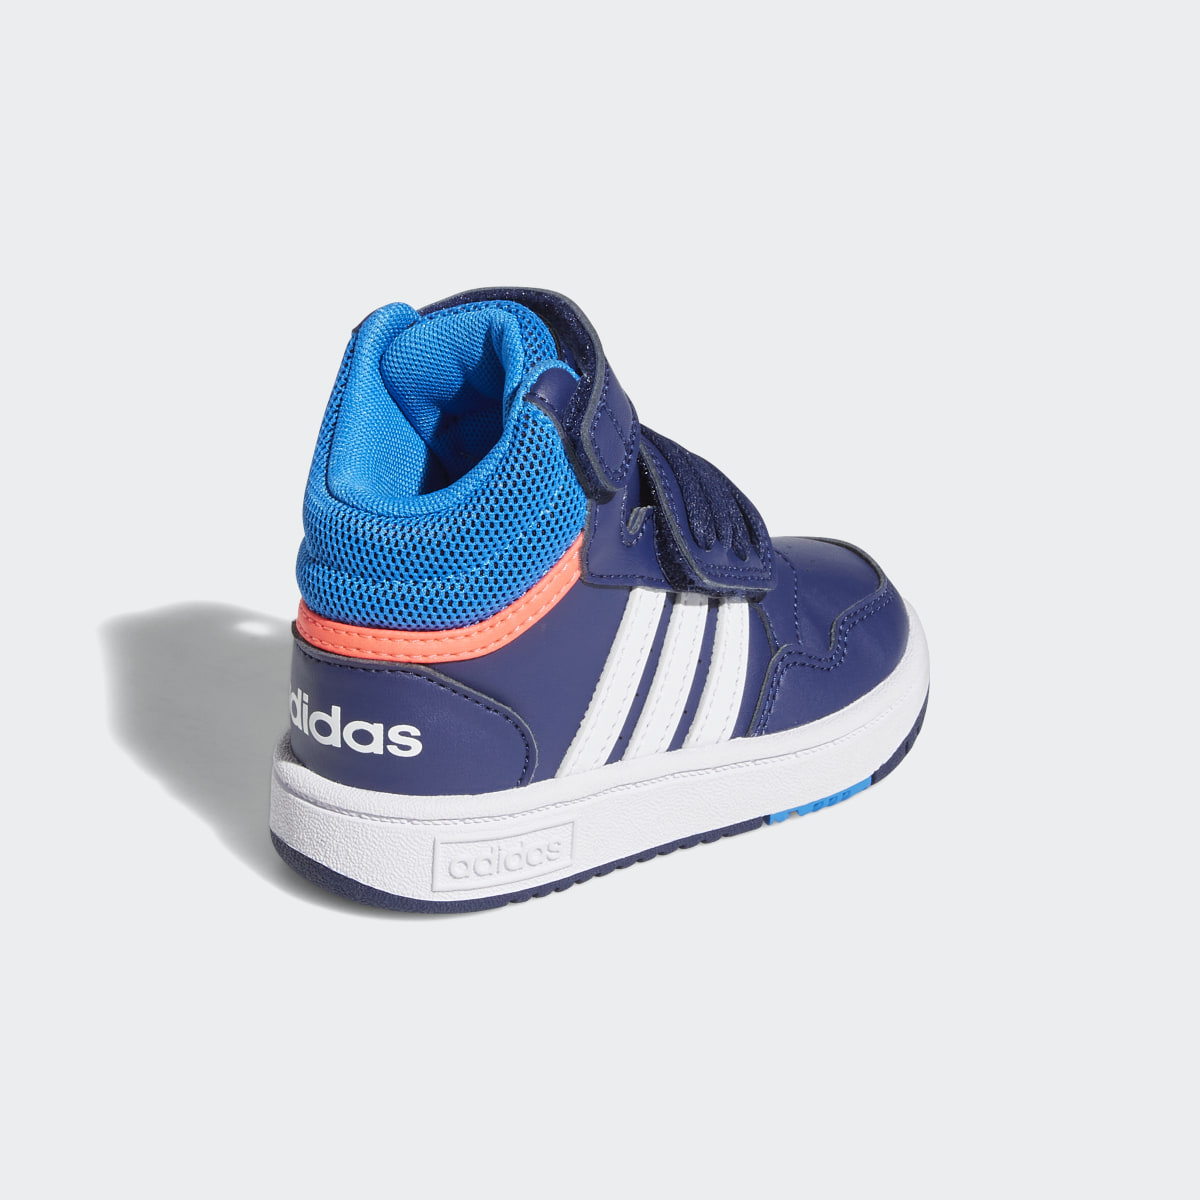 Adidas Chaussure Hoops Mid. 6